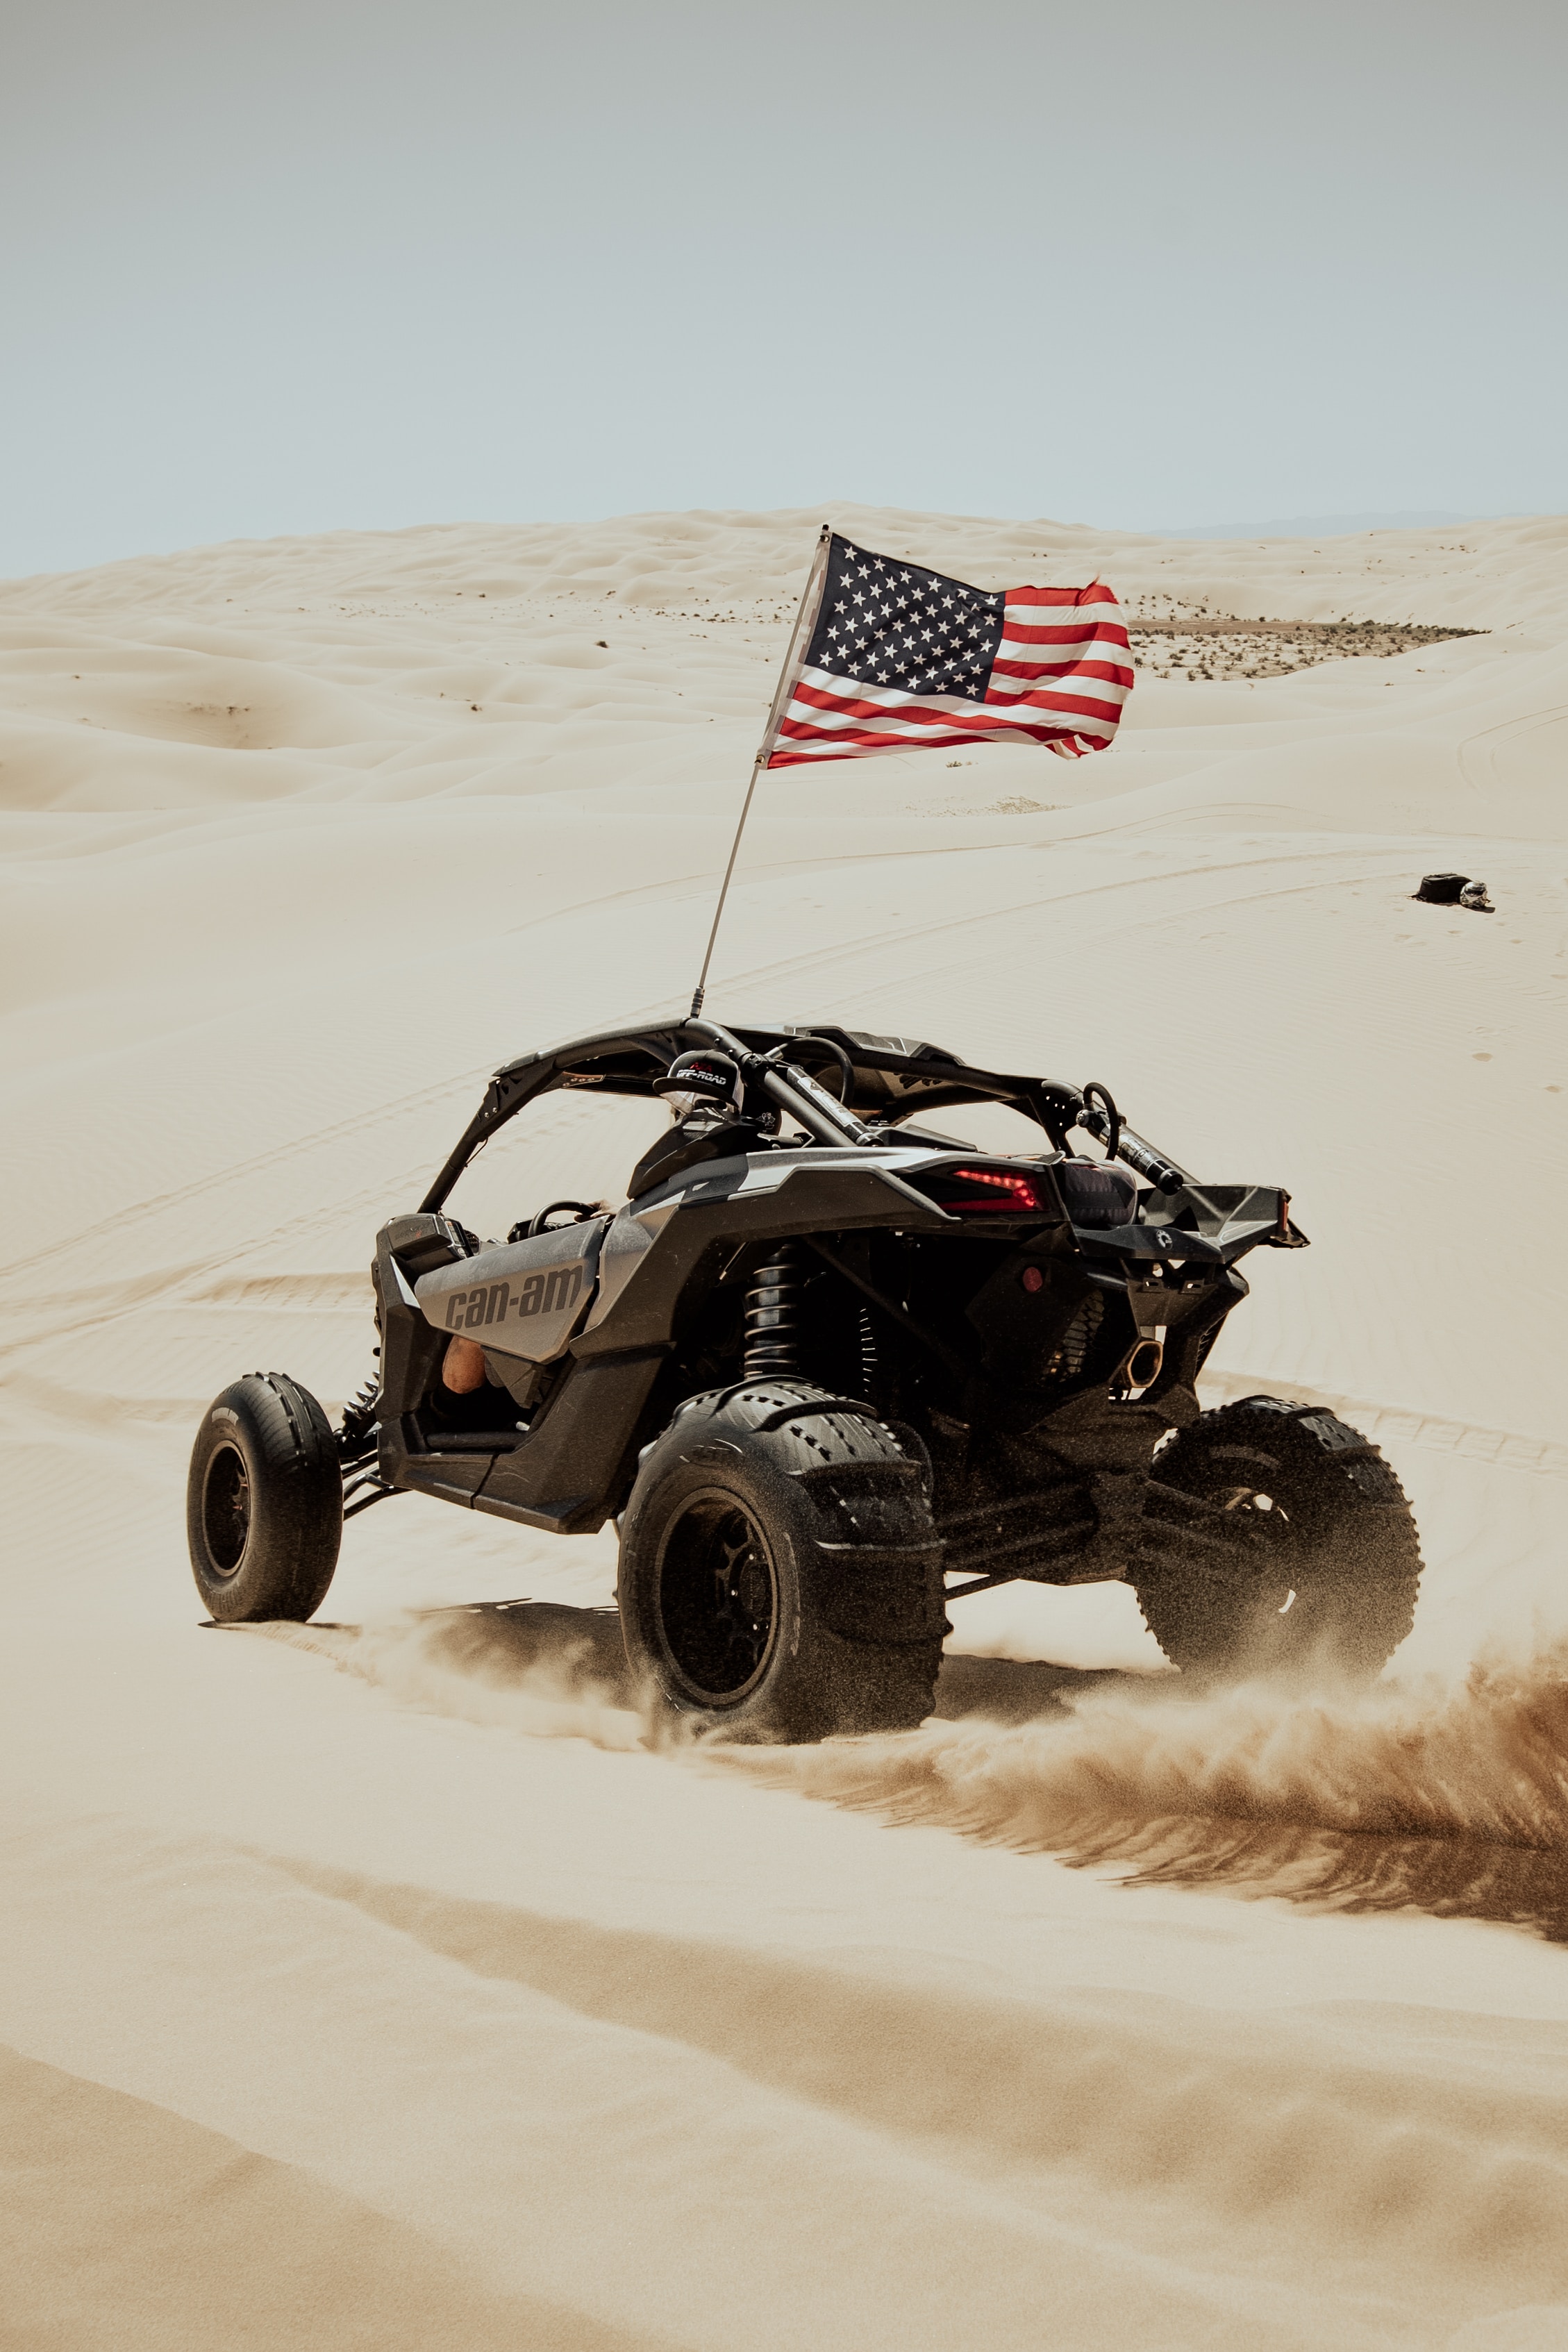 Buggy Vehicle Desert Offroad American Flag Flag Dust Daylight Portrait Display Can Am Sand 2258x3387